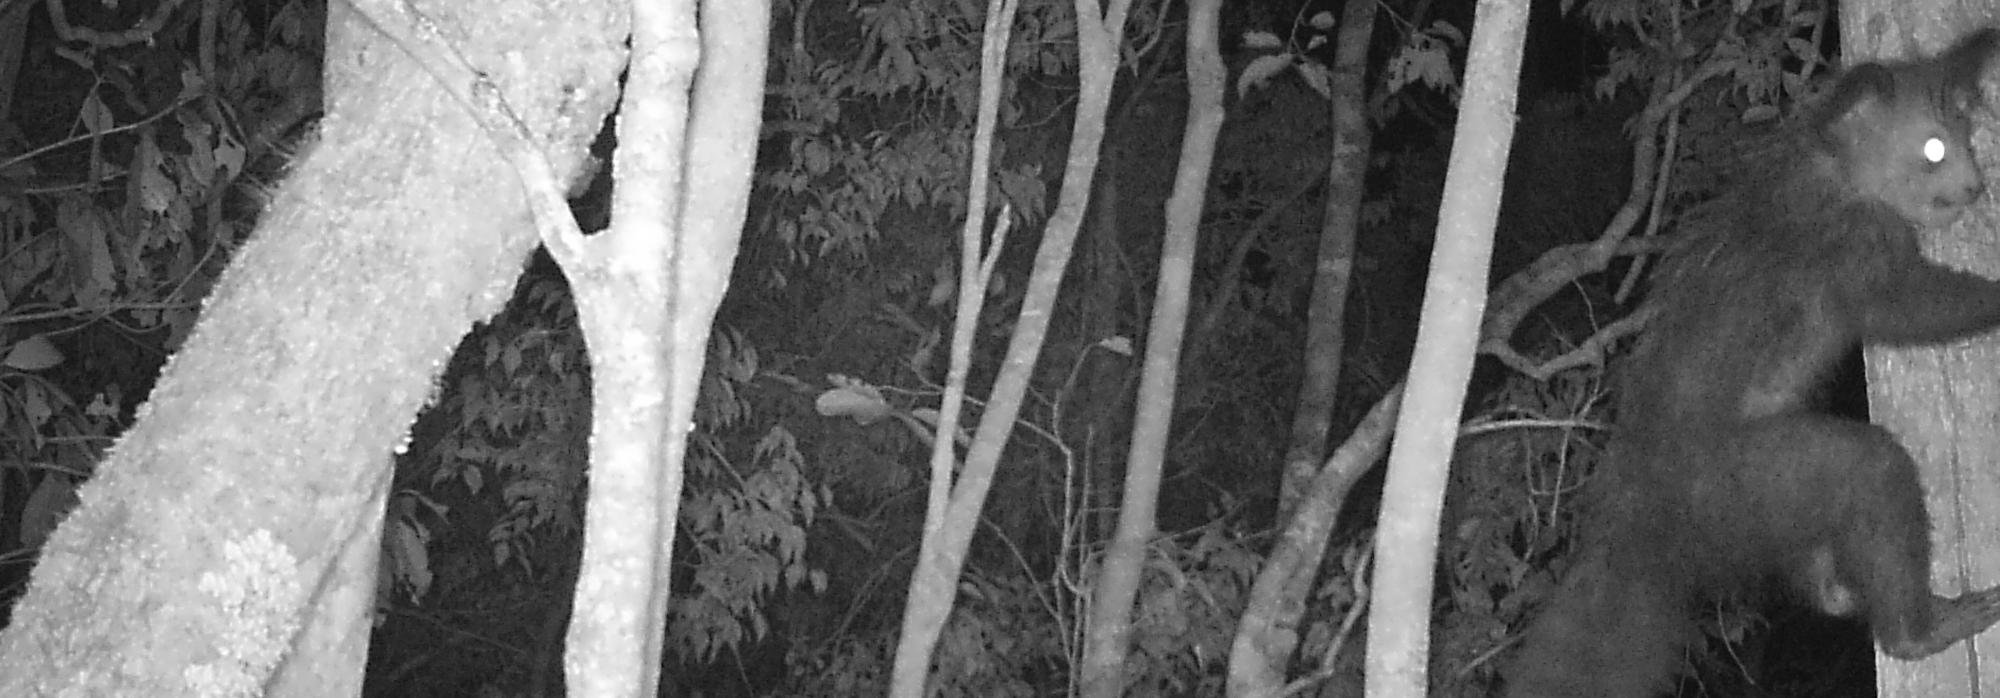 Aye-aye captured by Camera traps in the new Magabe protected area